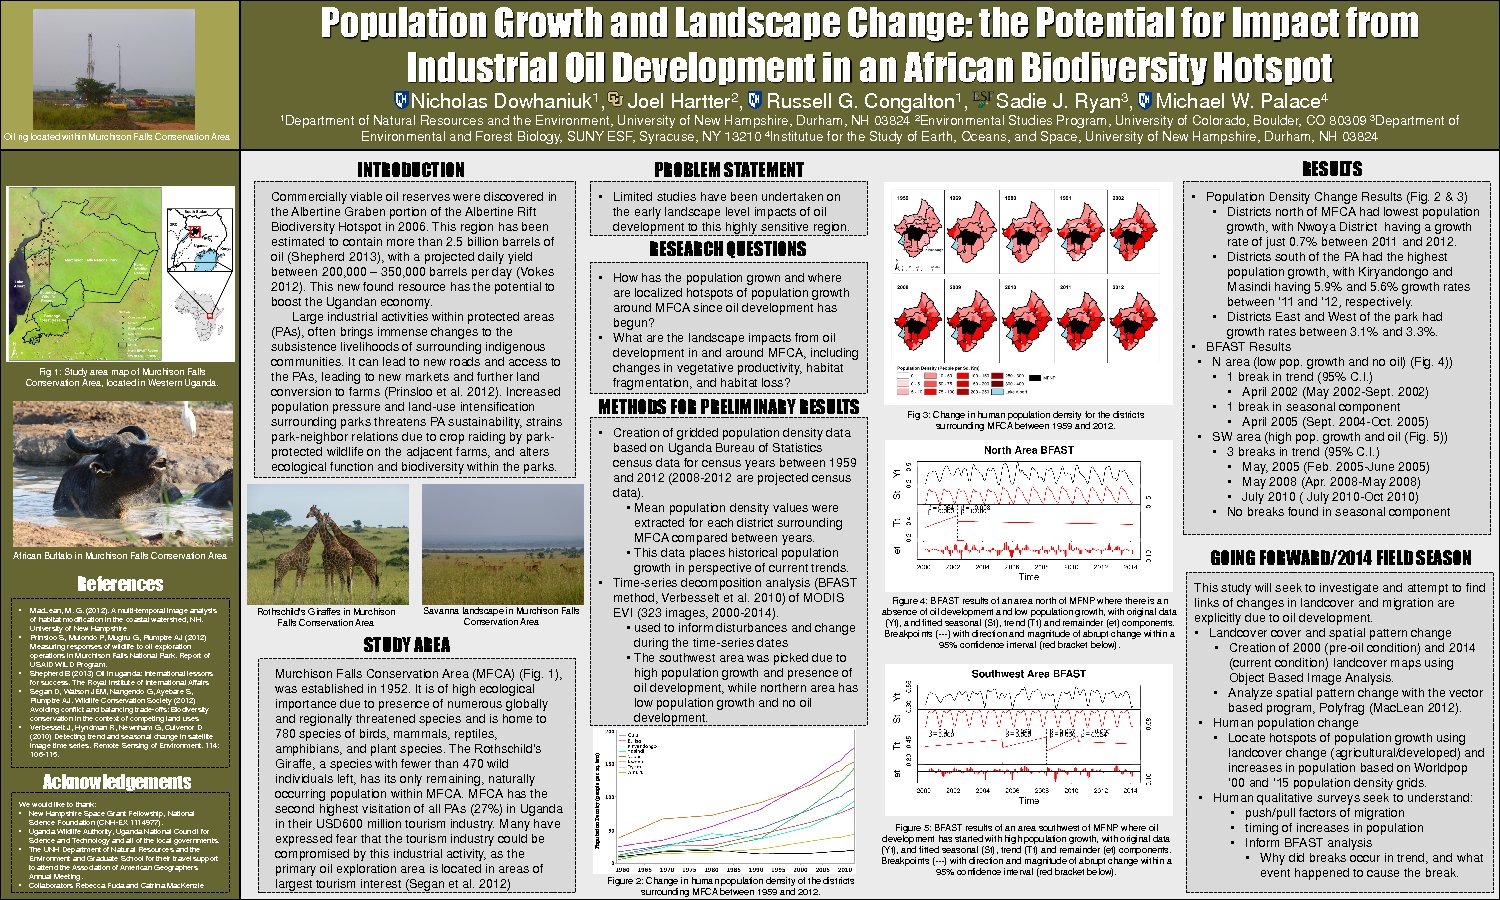 Population Growth And Landscape Change: The Potential For Impact From Industrial Oil Development In An African Biodiversity Hotspot by palace